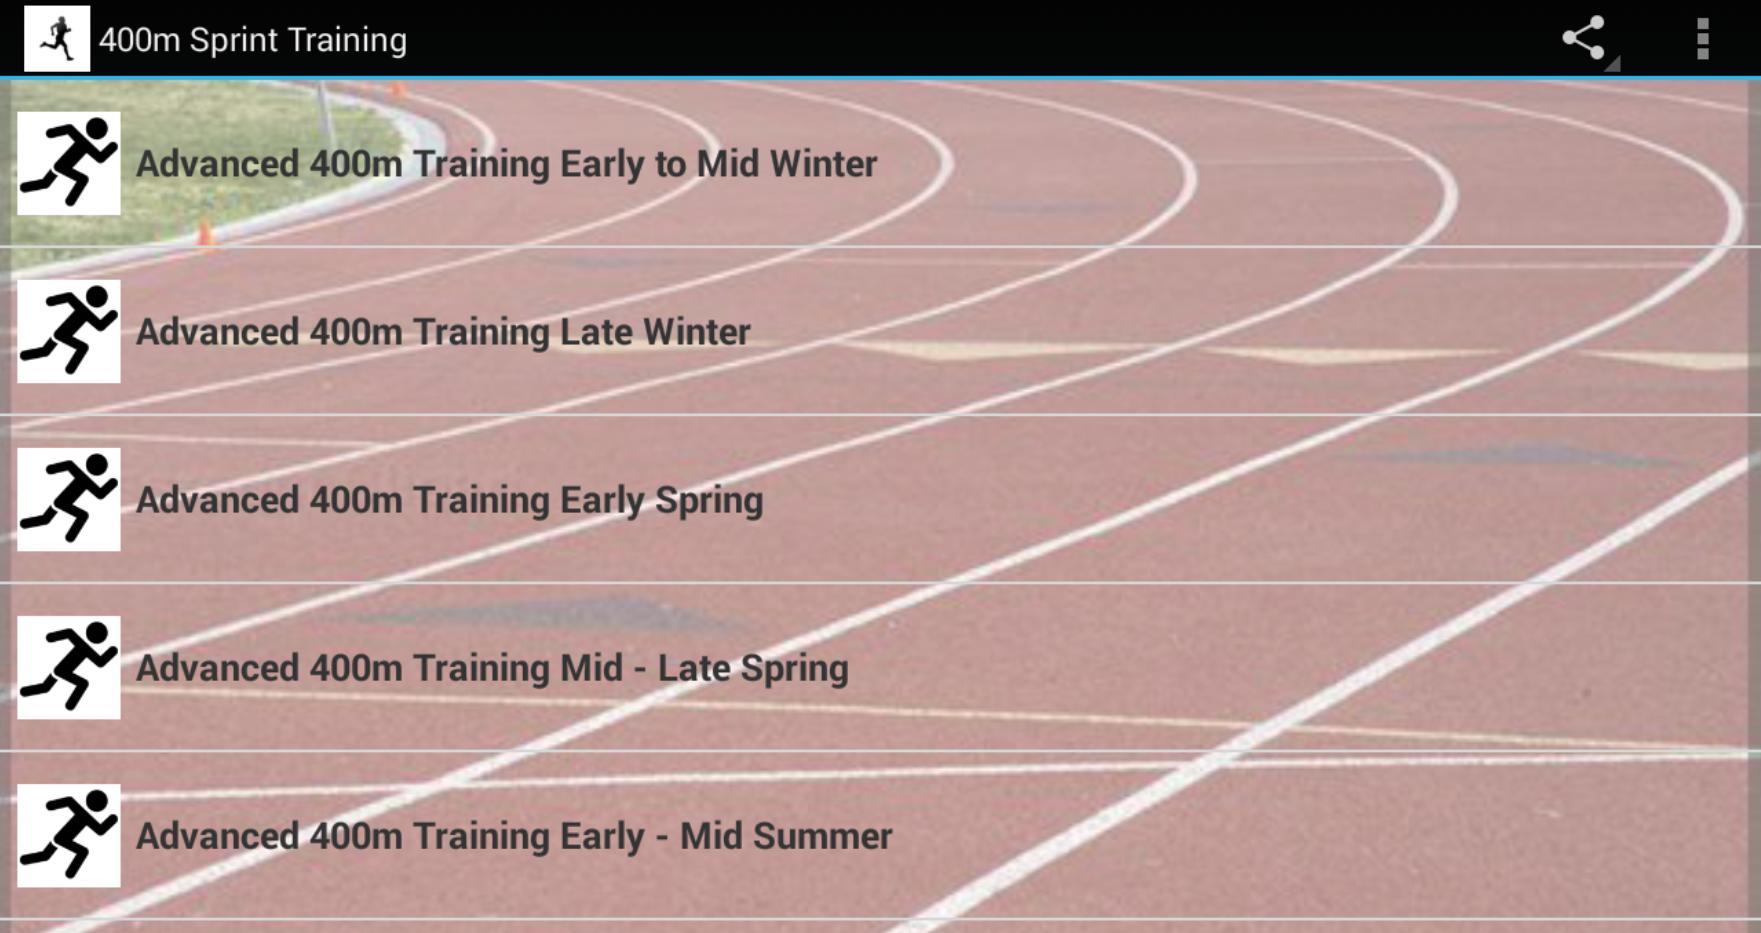 400m Sprint Training for Android - APK Download